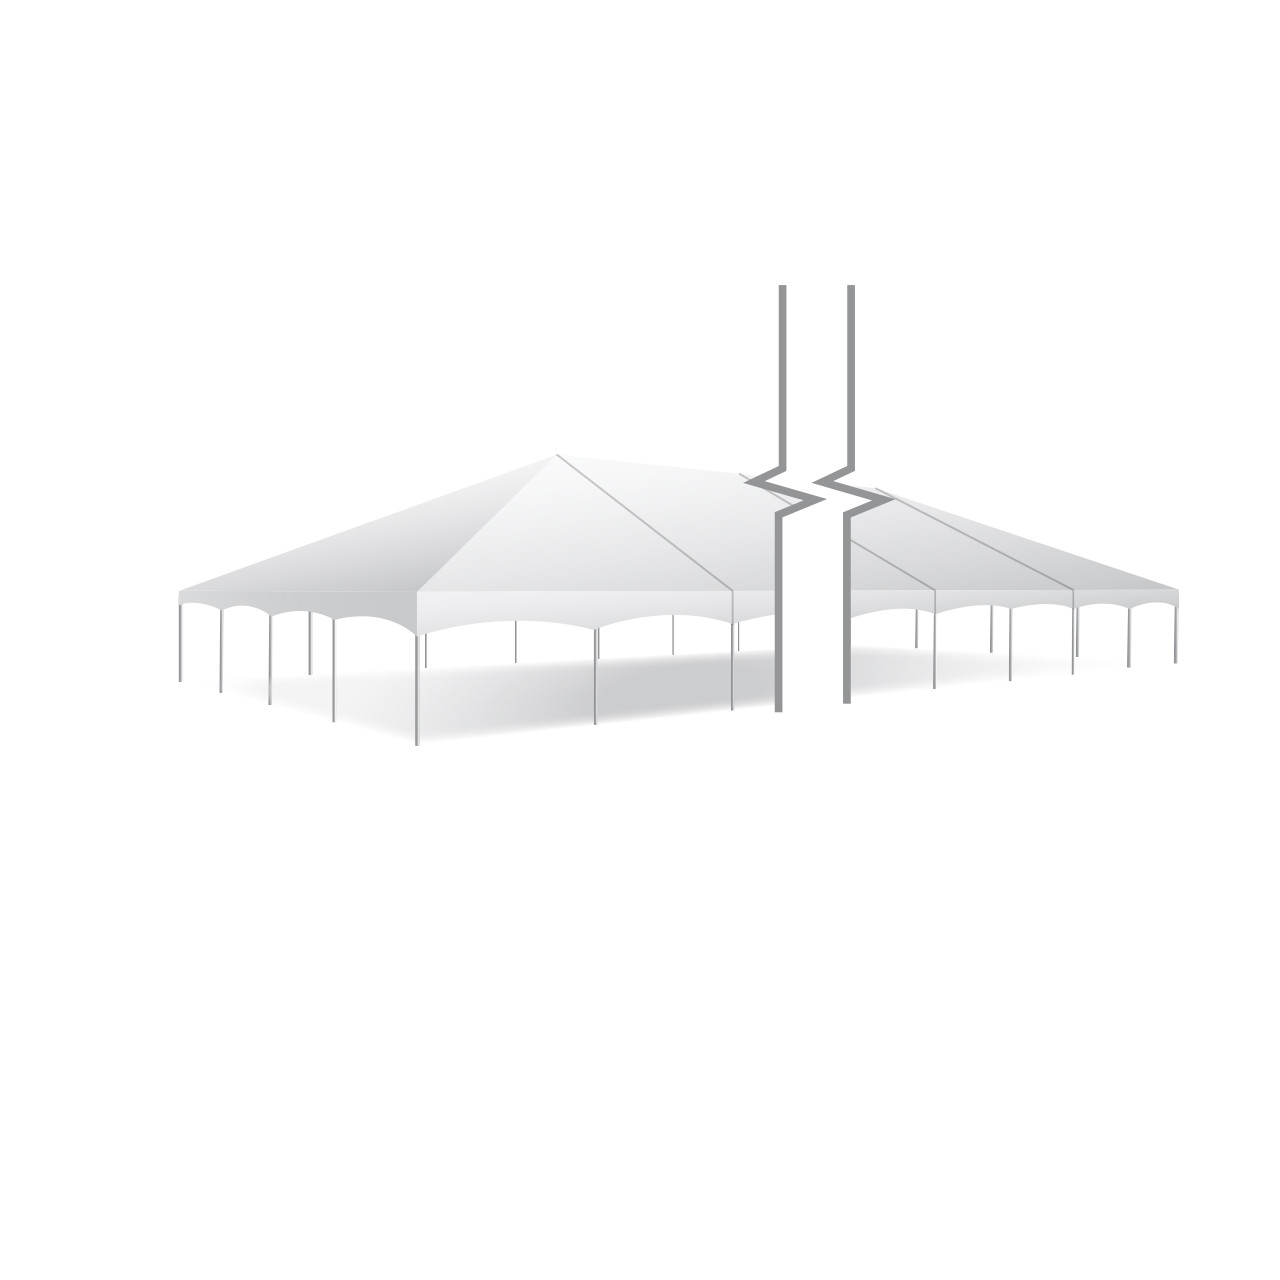 40' x 100' Master Series Frame Tent, Sectional Tent Top, Complete